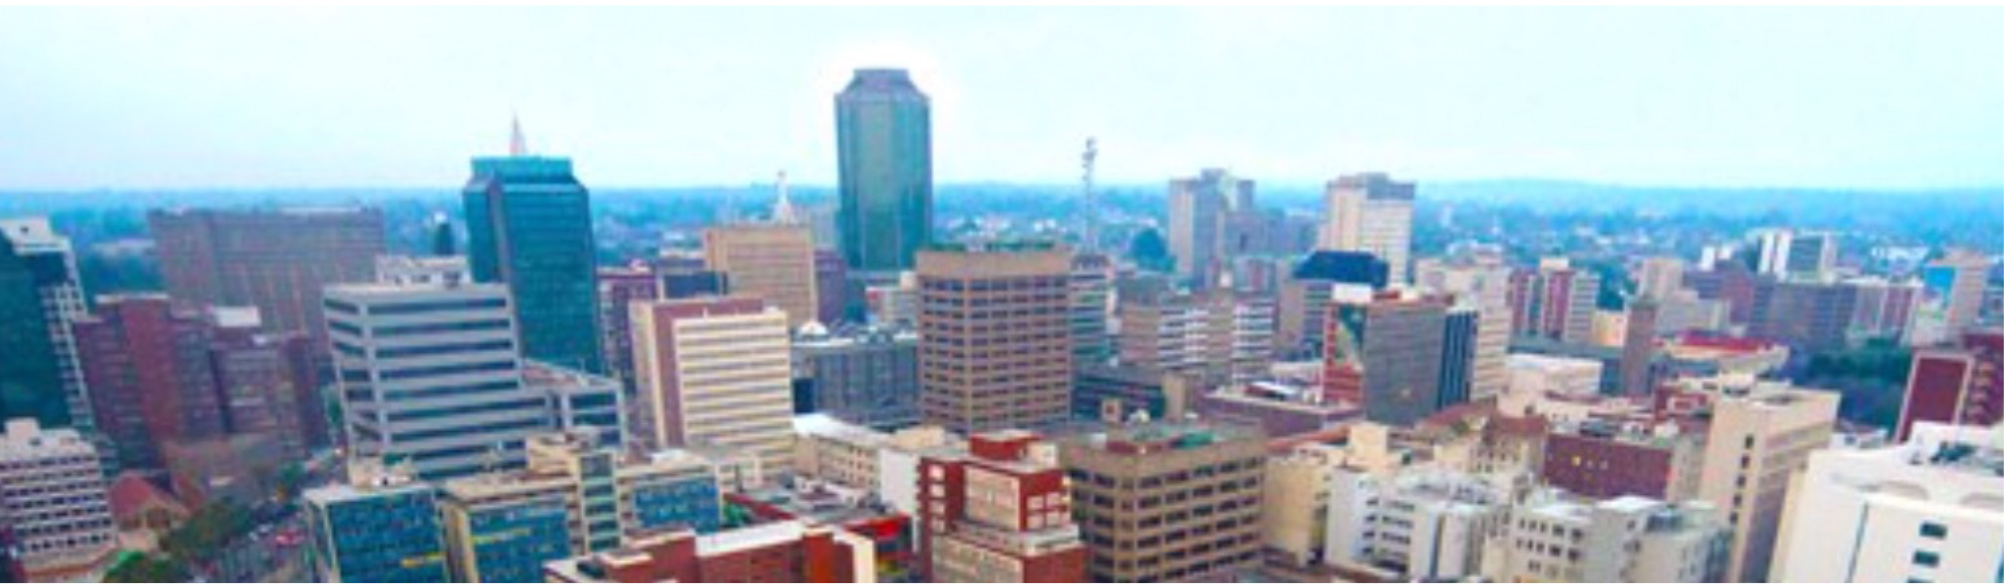 Over a lifetime, the Harare skyline has changed beyond recognition. With notable exceptions – the High Court, the foreign ministry, the Munhumatapa building ( time on the clock tower has long been stopped at twenty past three) - most of the squat colonial buildings are gone, giving way to gleaming towers of steel and glass. An old man on his first trip from deep in the rural areas marvelled at the new buildings and remarked that us the townspeople appeared to be obsessed with glass. “You even cover your eyes with it,’’ he said to a bespectacled me. He wasn’t impressed at all by the Karigamombe Centre or the faded gold façade of the Rainbow Towers – “Golden Delicious” as it was known to taxi drivers before the elements of sun and storm took their toll on the then Sheraton. Nor was he impressed by the imposing edifice of the central bank. On the bus on the main road from the west he could see the Reserve Bank from some 20 kilometers away. It is designed to be seen from all the city’s main approach roads. He didn’t know until I told him that the bank’s octagonal design is symbolic of an upended maize cob - maize being the once abundant staple food and the cob-like skyscraper represents the Horn of Plenty, the nation’s cornucopia. Inside, it has marble trimmings and suites and boardrooms to match the best in Frankfurt or London. Alas, as the economy took strain in recent times, the Horn of Plenty emptied soon emptied. A few blocks away, across my home town, is Eastgate, a fine shopping mall and office complex behind Meikles hotel that has rows of rooftop chimneys. When the building is lit after dusk it looks like an old steamship ploughing into the night. It was Zimbabwe’s first really “green” construction project, based on nature’s self-ventilating anthill. Its designers insisted it saved 70 percent of the energy costs the central bank building would gobble up. Walking on chill winter mornings in the multiple green belts and vleis of Harare, I have often watched condensation stesteaming from the conical anthills as the worker ants aerated the depths of their nest. Beautiful Harare is much like other former British colonial capitals whose planners allowed for plenty of tree-lined avenues and open spaces, quite unlike the cities in former French or Portuguese territories. Late in the year, we are washed with the magnificent lavender blossoms of the prolific jacaranda tree. The main square, Africa Unity Square, has been a sight to behold for as long as I can remember at jacaranda time. The flower sellers and curio stalls add their colour to the square but the central fountains don’t seem to perform their kaleidoscopic water dance anymore. I wondered in the 1970s why they pulled down the fine old fashioned Meikles hotel, but it was progress, we were told. The old Meikles had a Palm Court orchestra in the ballroomplaying jazz standards and tea-room waltzes. The square on Meikles’ north side was where the colonial era settlers raised the Union flag right opposite The Herald offices of today. They hadn’t intended to set Fort Salibury here, but it was unclear where a better site for the catchment of natural water was to be found. By the time it was, it was too late to move the settlement. So Harare is actually in the wrong place. An underground water course runs along Seke Road and Julius Nyerere Way up to Harare Gardens and the Avenues district of apartments and townhouses. When I lived in the Avenues, my uncle, a water diviner, believed one reason I slept uneasily could be that my bed was placed east-to-west, against the flow of the water beneath. I was in its negative field. I moved the bed north-to-south. It worked. But it might have been a psychological thing, I suppose. Back then, the dormitory township of Chitungwiza was mushrooming 25 kilometres to the south of the city centre and it was proposed by various armchair engineers that the underground river could be excavated and made into a canal for commuter barges. We could become the Venice of Africa…The idea, of course, never got beyond the armchairs. In any city, there is always a dividing line between the ritzy executive offices and the hugger mugger of real life. Ours is Julius Nyerere Way. Cross it going west and enter a bustling tumult of wholesalers, shoe shops, stores for cheap clothing, haberdashery and aromatic spices, cafés, take-aways and liquor marts blaring loud Afro-pop over the pavement. And beyond that, of course, there are the “high density” suburbs, once the segregated townships where colonial planners put the workers needed for Harare’s factories and businesses. Harare’s political nationalism has its mother lode in Highfield township where as young reporters many, many moons ago, we enjoyed the bars, shebeens and hotels – notably the Mushandire Pamwe hotel _ and listened to real township music at the Saratoga nightclub. My own “low density” suburb of Eastlea awakens with the surround-sound of the dawn chorus that no iPod could ever match. An artist friend of mine advises the best way to start the day is to listen to the birds for five minutes before switching on news programmes or beginning other stressful activities. The dawn chorus today may be accompanied by the rumble of petrol generators. I regard Harare, even though it’s worn, littered and horrifically potholed right now as my town and I love it. I and journalist colleagues of my vintage knew almost all the nationalists after whom streets were renamed after independence. In my travels over the years, I met Jason Moyo and Herbert Chitepo, both later to be murdered, and after 1980 I lived in a flat on Herbert Chitepo Avenue. I had met Josiah Tongogara, I had befriended George “TG” Silundika, I knew Josiah Chinamano and I had spoken with or interviewed Nelson Mandela, Julius Nyerere, Kenneth Kaunda, Samora Machel, Sam Nujoma and – it should go without saying - President Mugabe. The museum at Heroes Acre displays the old VW beetle in which a bomb killed Herbert Chitepo. We as reporters had dealings with almost all the fallen who lie at Heroes Acre. What’s more, if you have lived as a journalist in a city as long as I have there’s hardly a block of flats or an office building I haven’t been inside at some time or another, nor a bar, school, hospital, church, courthouse or even jail. You can’t say that about many capital cities of the world. That’s where my father’s remains rest, there are the offices where the corporate vipers lied to us, that’s where my pension evaporated in hyperinflation, that’s where we held the wake for dear but tormented Frank Moore, a school friend, after his suicide 35 years ago. That’s the cemetery where Frank’s bones sleep, that’s where Catherine lived … reminding me whenever I pass it of John Le Carre’s words: there were some women who carried their bodies as if they were citadels to be stormed by only the bravest. Maybe it’s a small town thing. Indeed, we are comparatively small and my Harare roots may well be comparatively shallow. But my dictionary defines: Roots, pl, n, the close ties one has with some place or people as through birth, upbringing, long association etc. I don’t care what anyone says. Harare, my birthplace, is home and, God willing, I’m not going anywhere else.